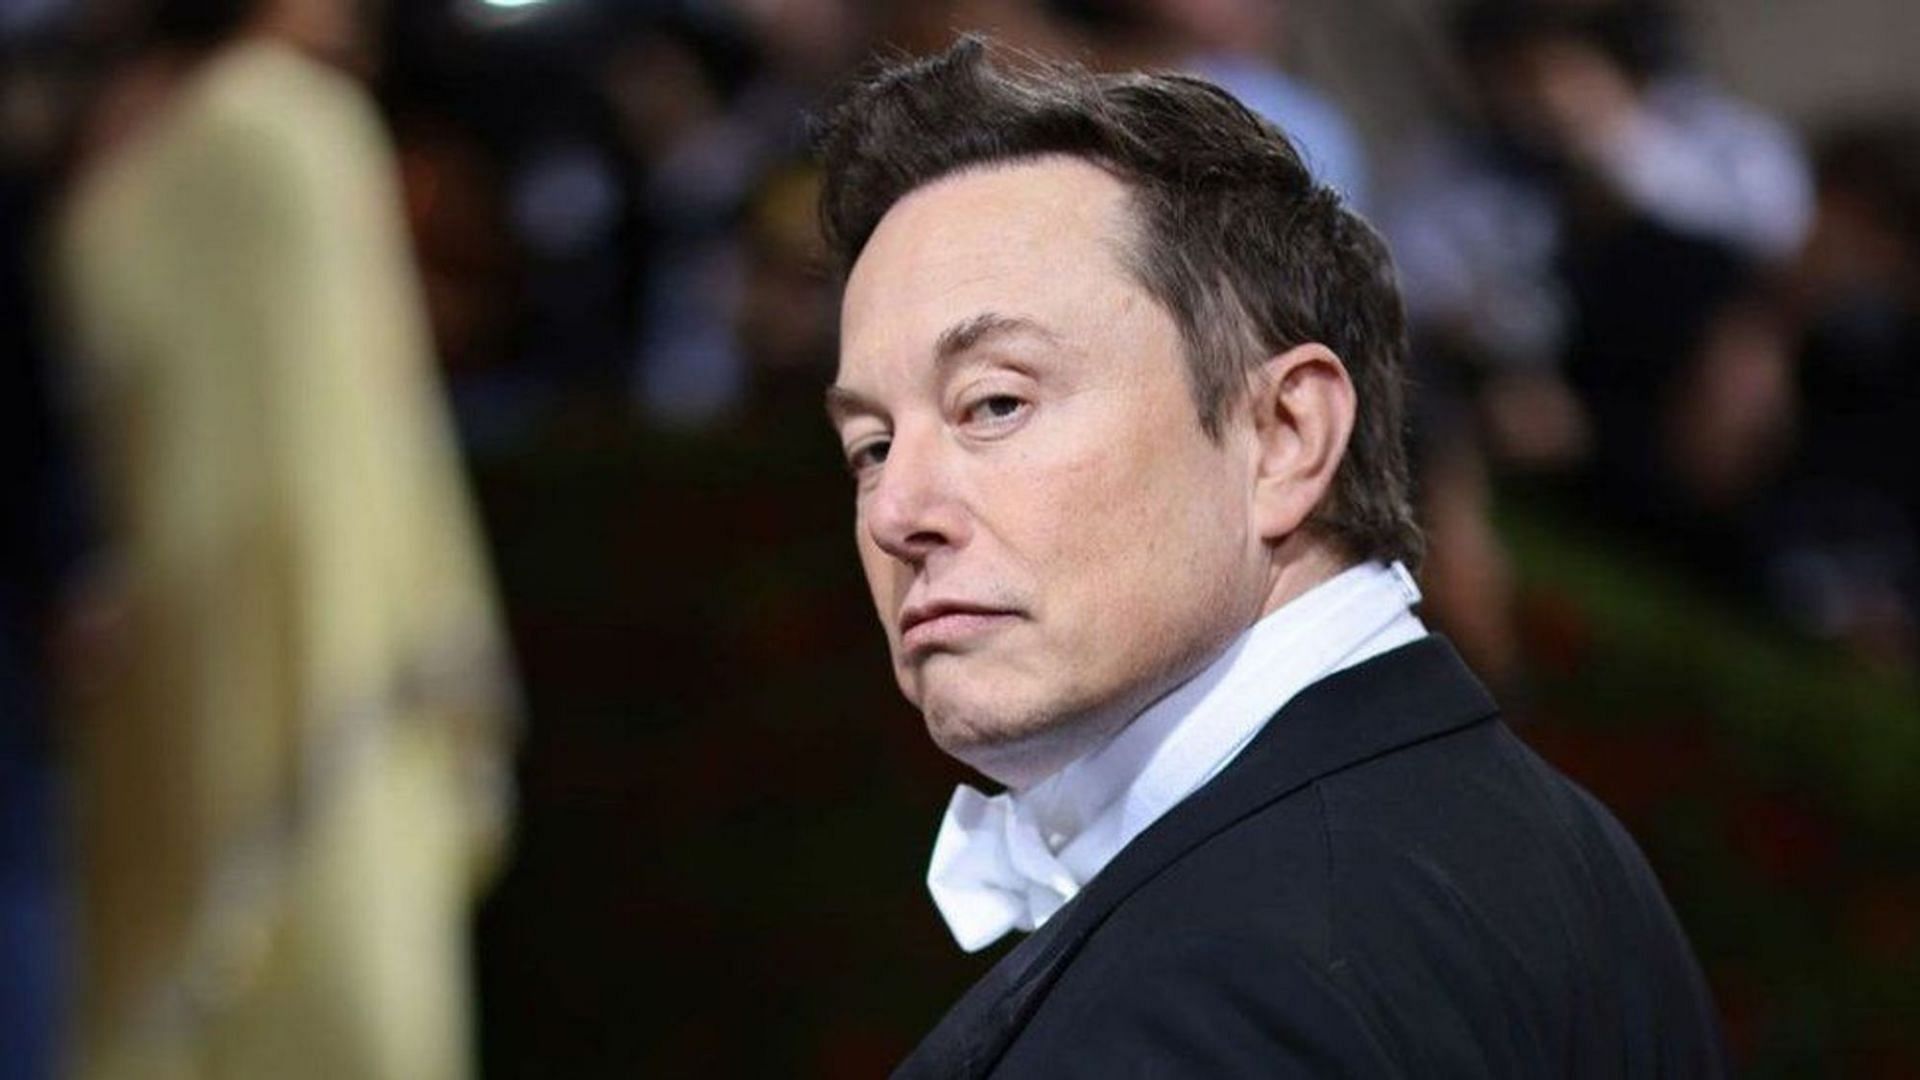 Elon Musk accused of misconduct by SpaceX flight attendant (Image via Getty Images)